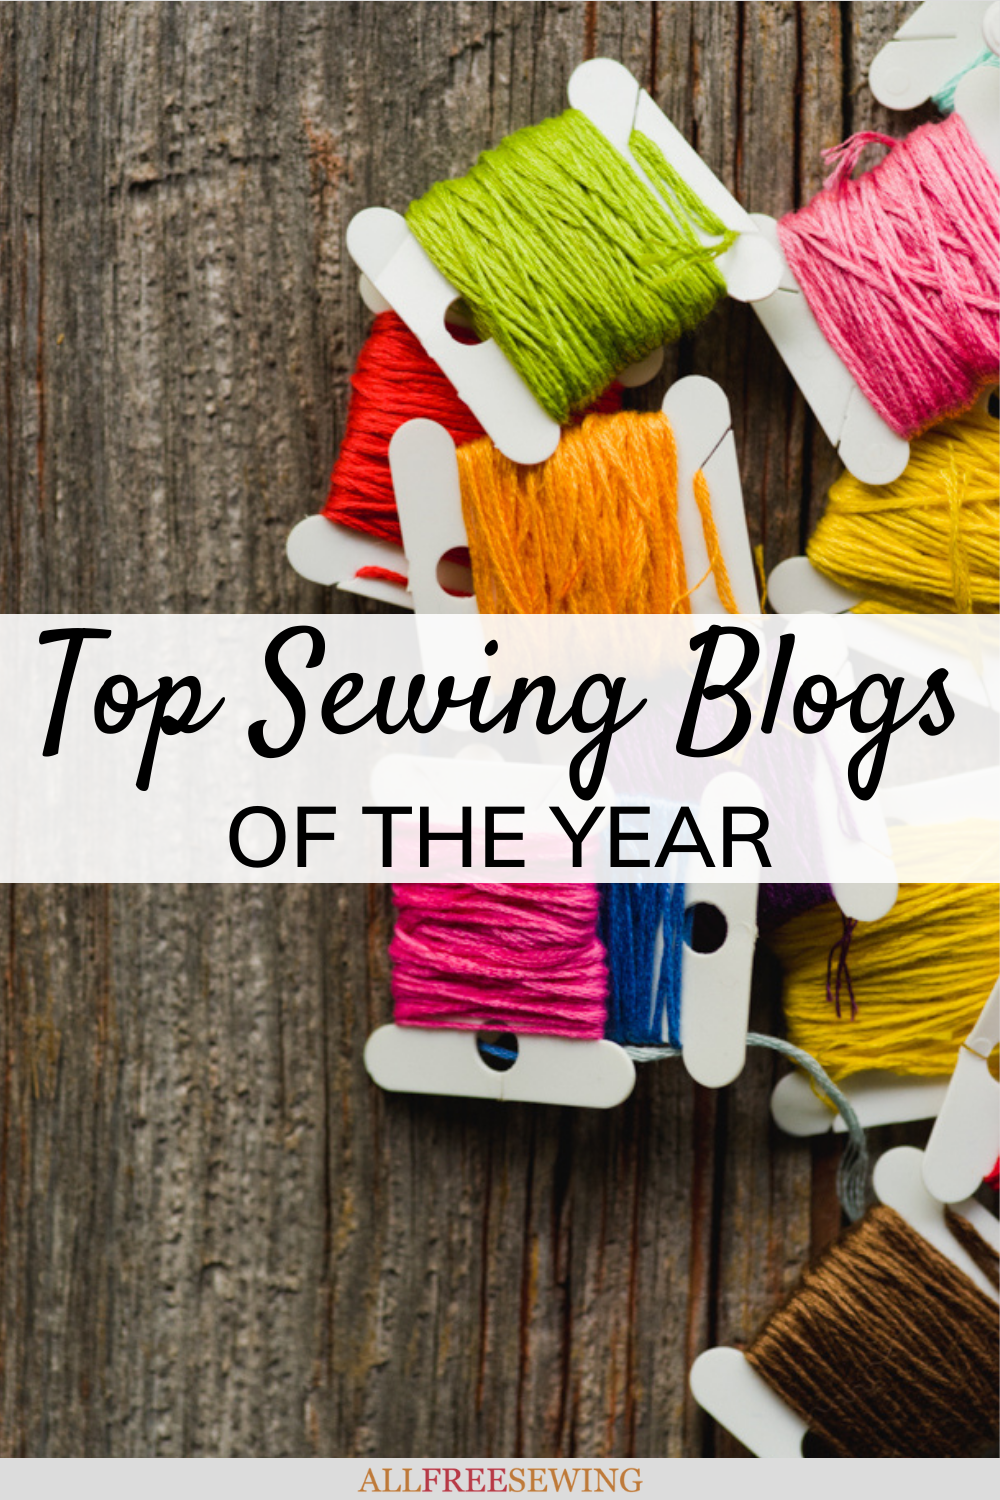 30+ Scrap Fabric Ideas for your Home - The Sewing Loft